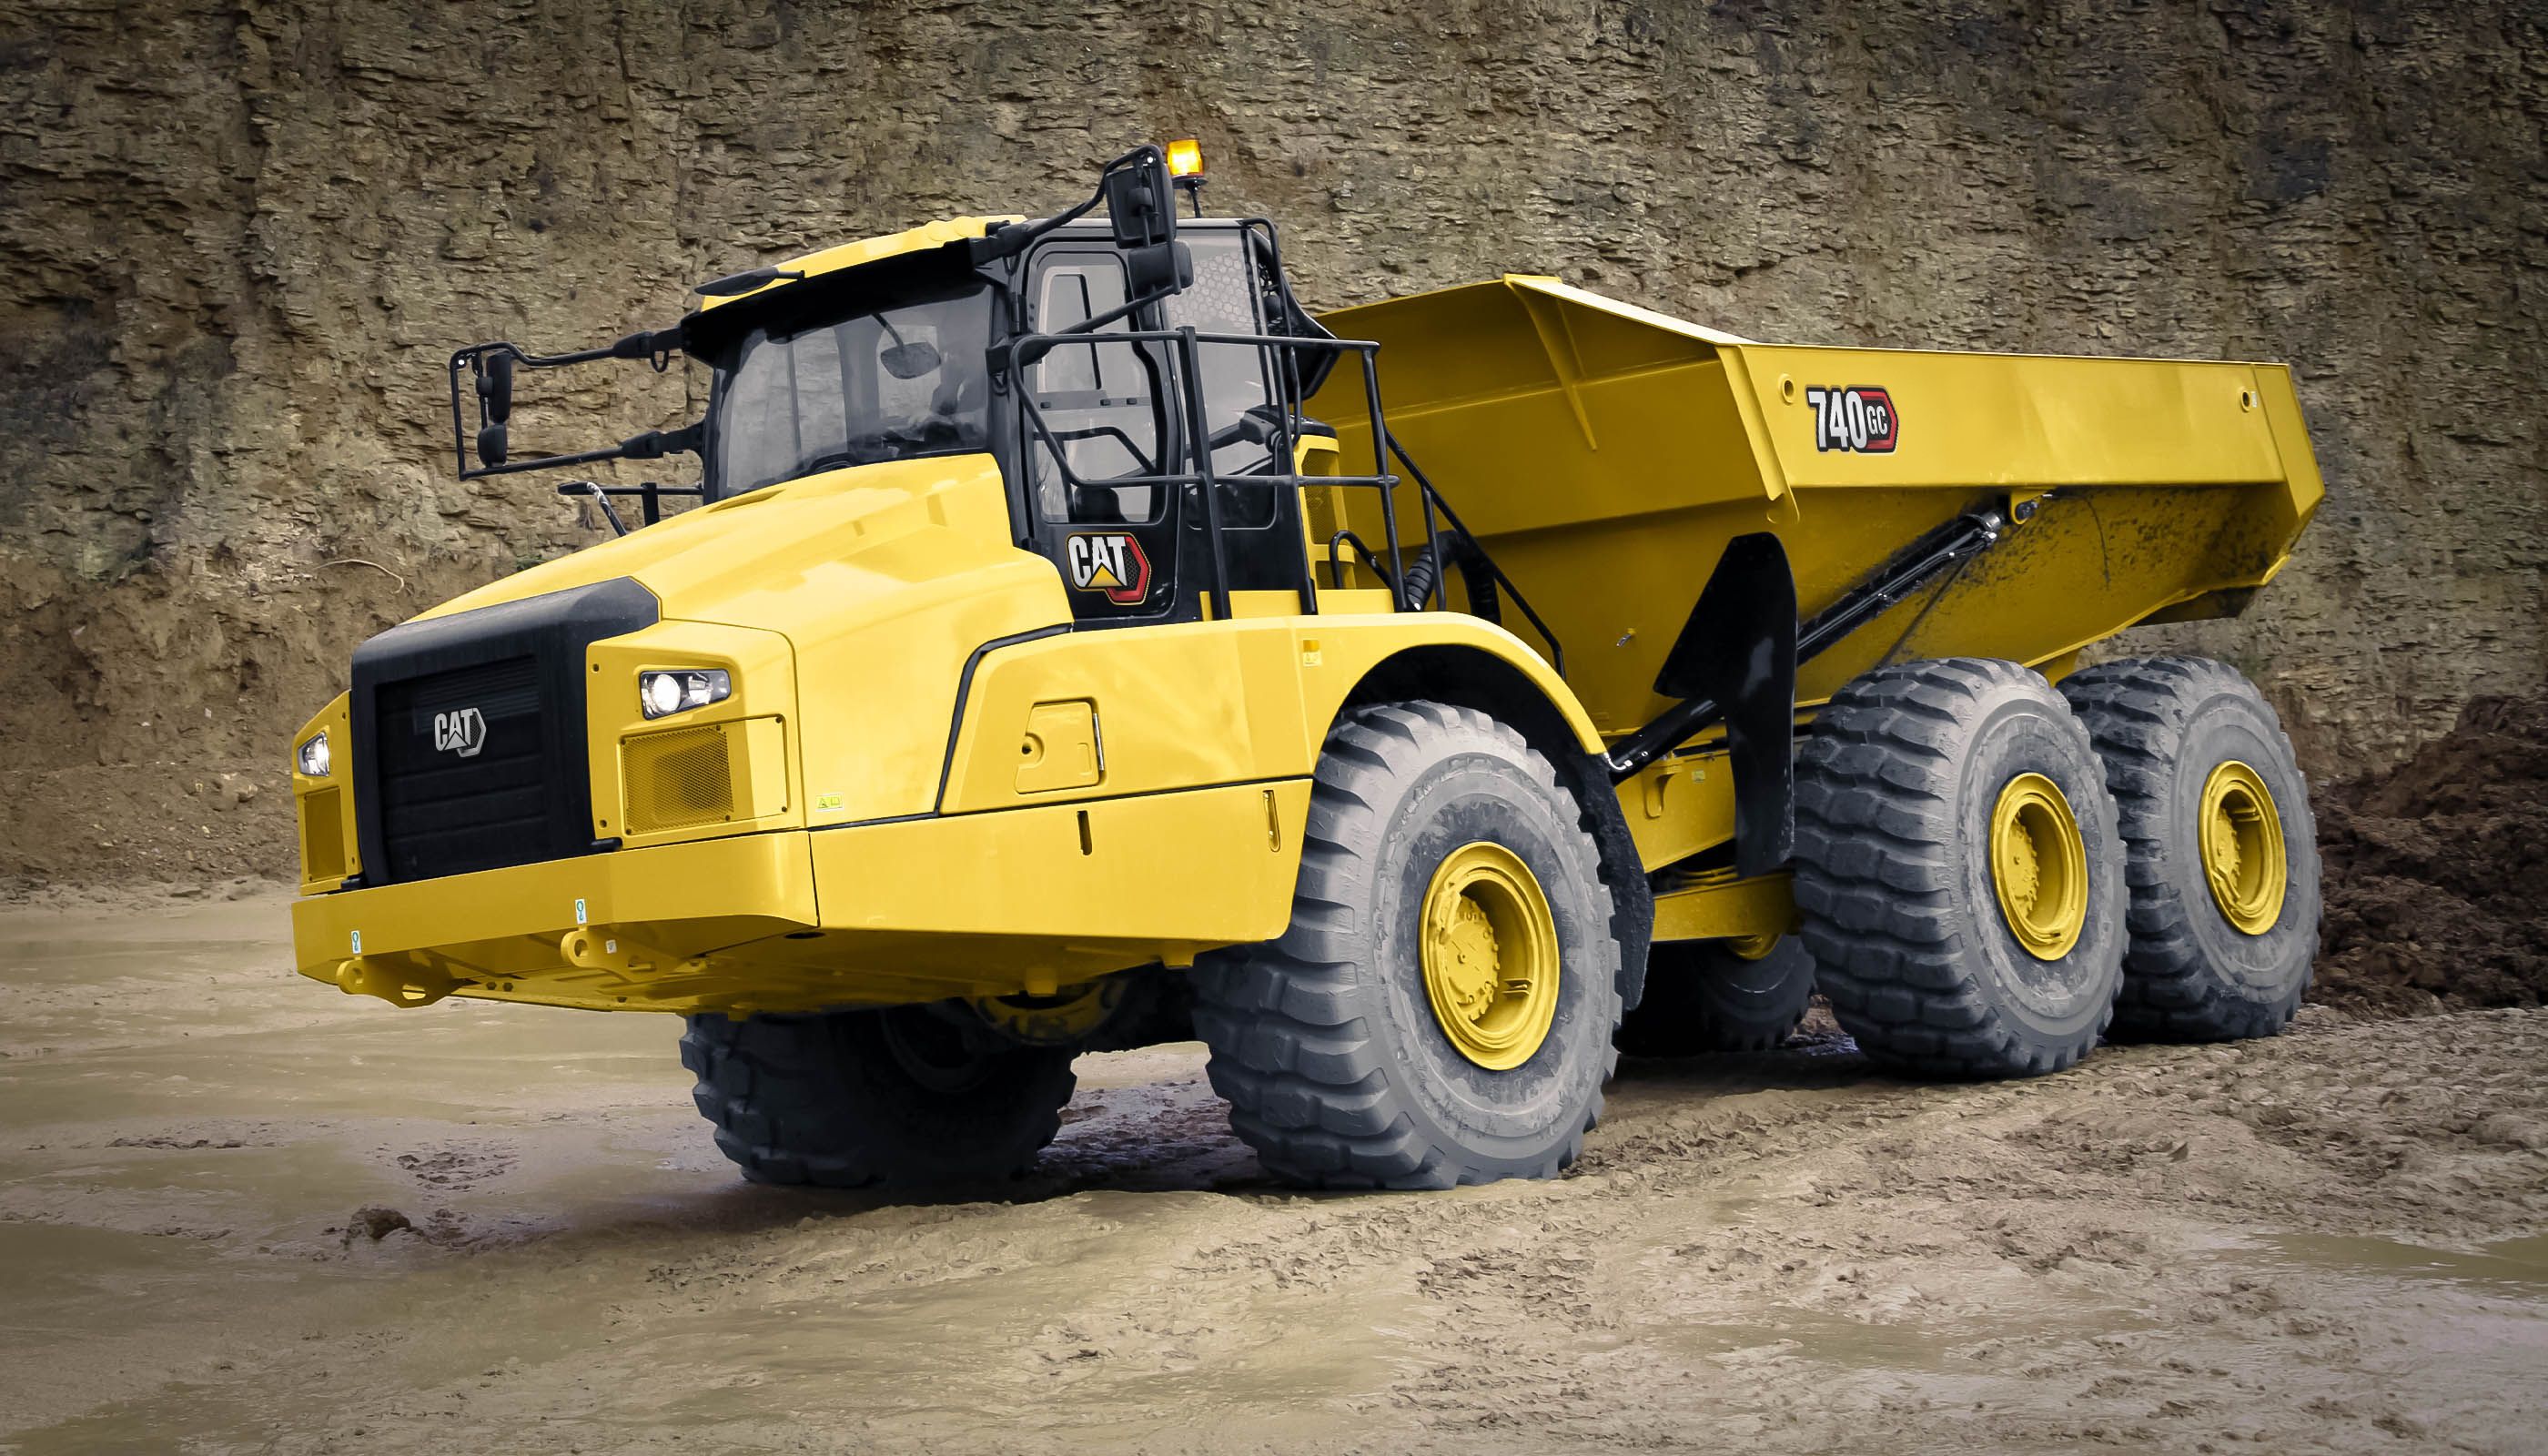 7 Tips and What To Look for When Buying a Used Dump Truck